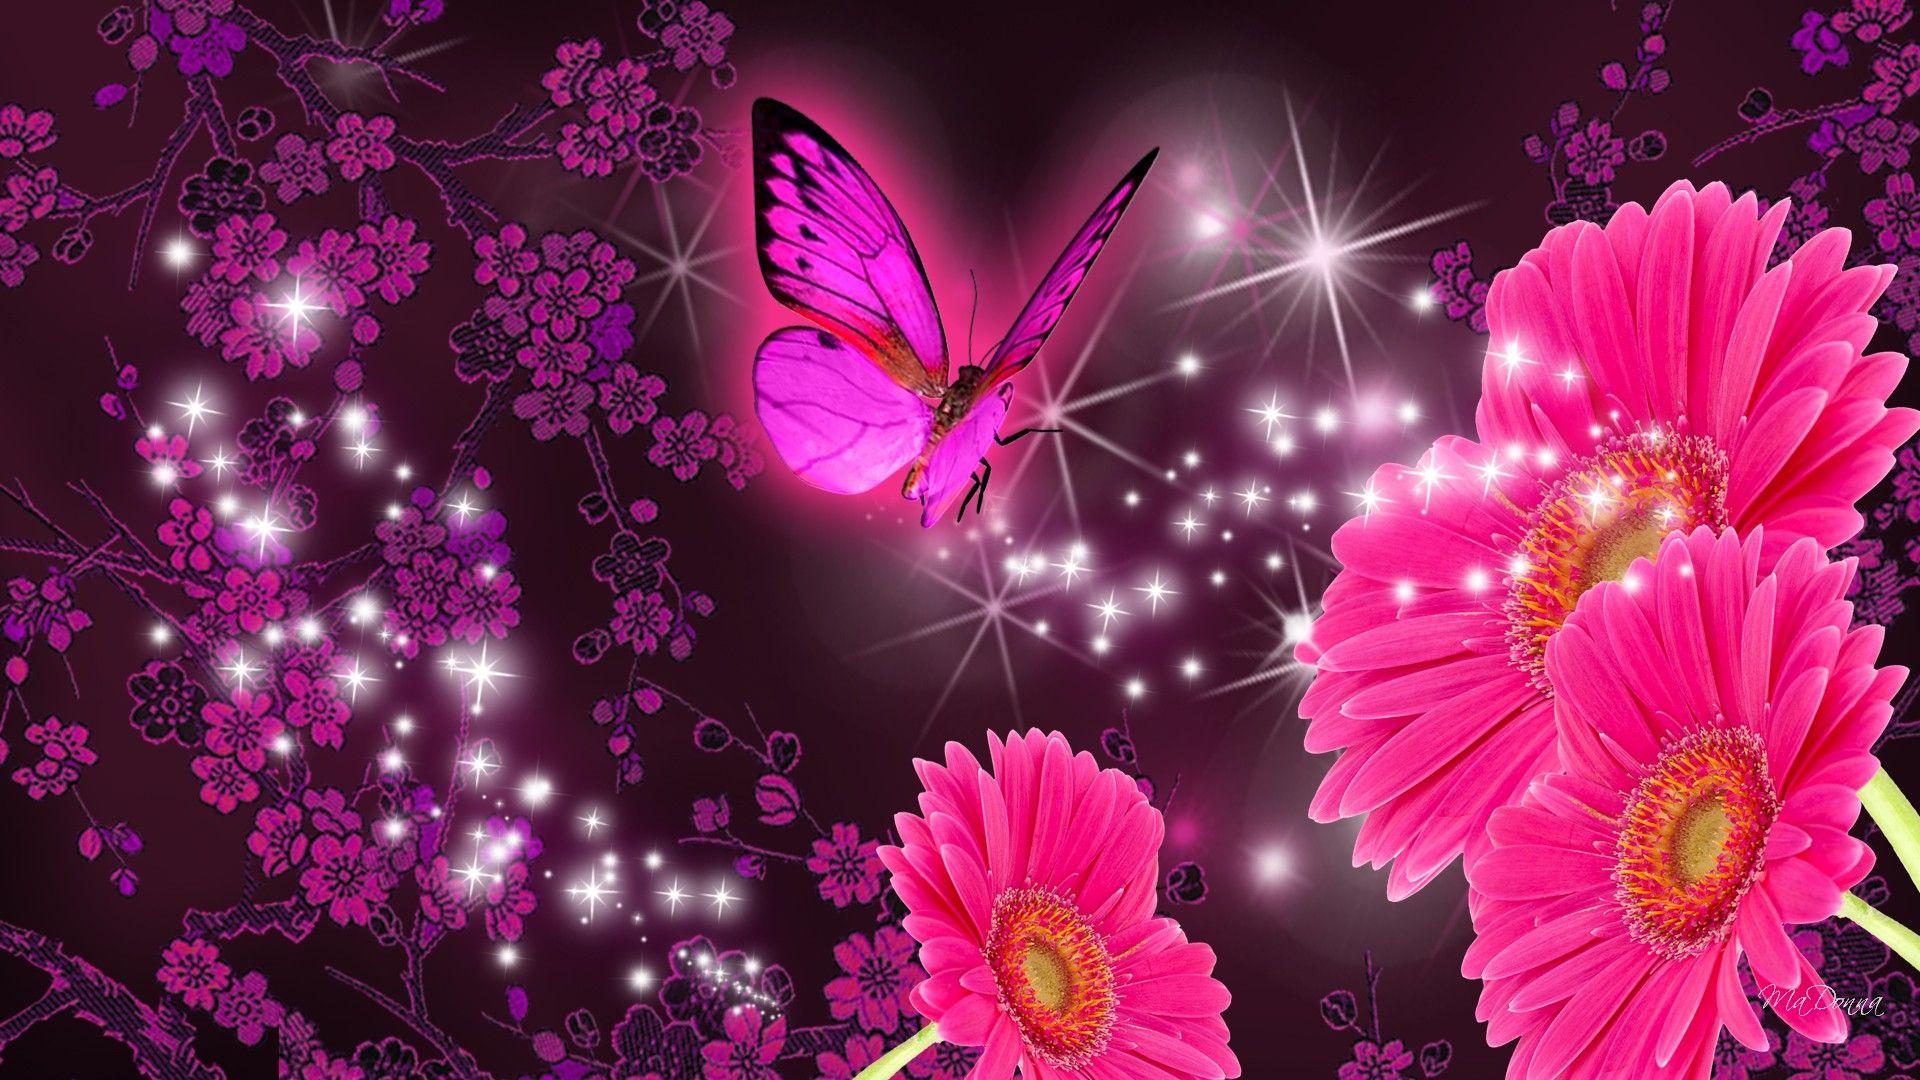 Pink Gerberas and Purple Butterfly Full HD Wallpaper and Background